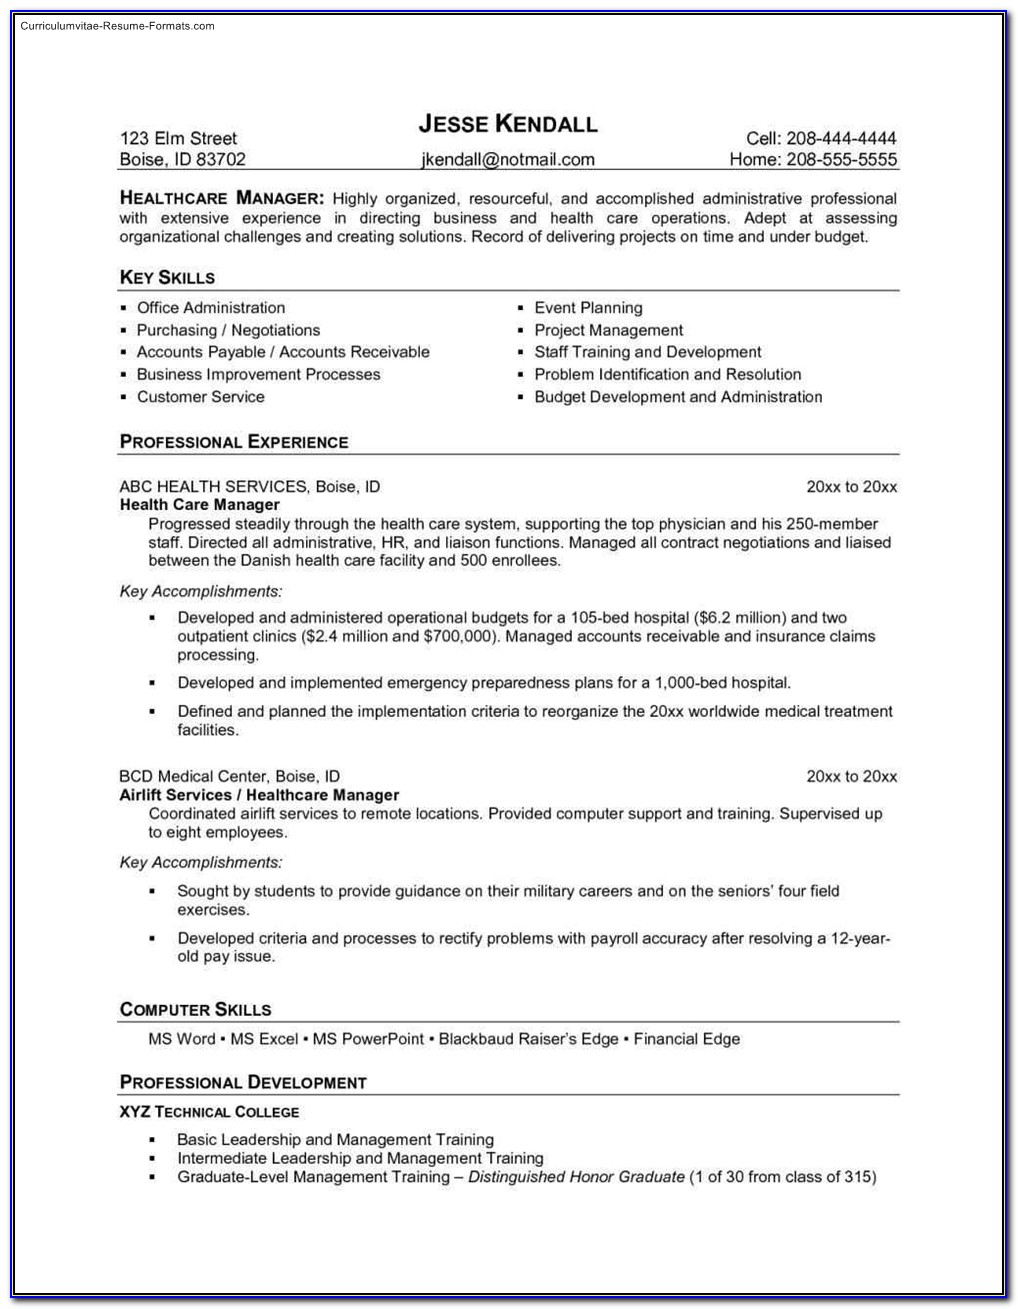 Physician Assistant Resume Writing Services